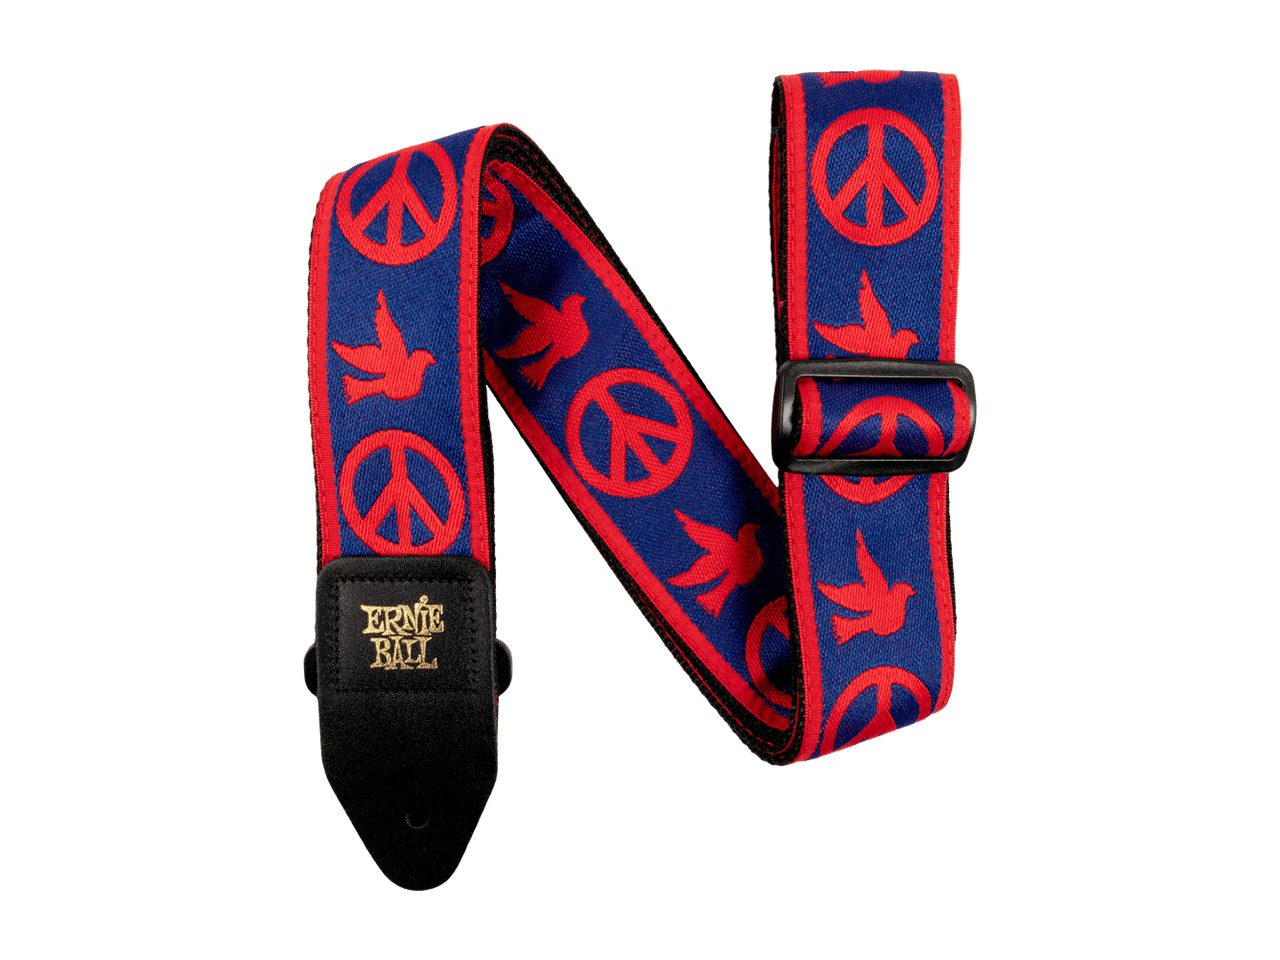 ERNIE BALL(アーニーボール) RED AND BLUE PEACE LOVE DOVE JACQUARD STRAP (ストラップ)